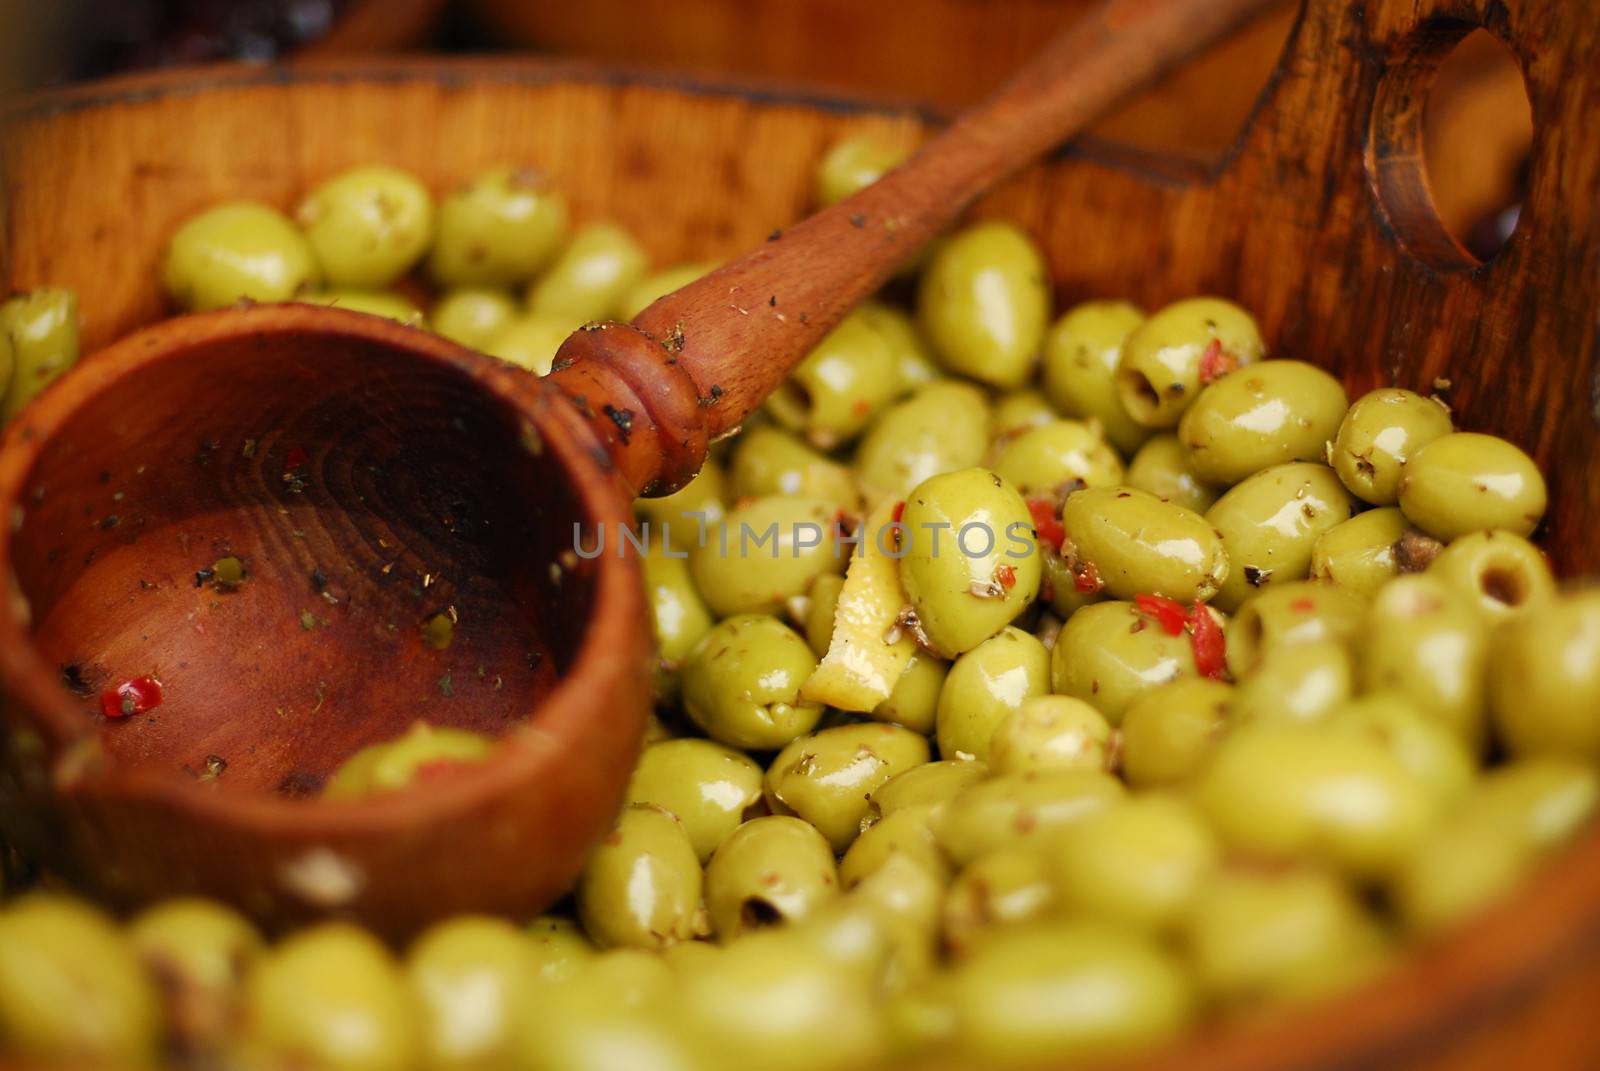 Olives being sold at a marketplace by stockyimages